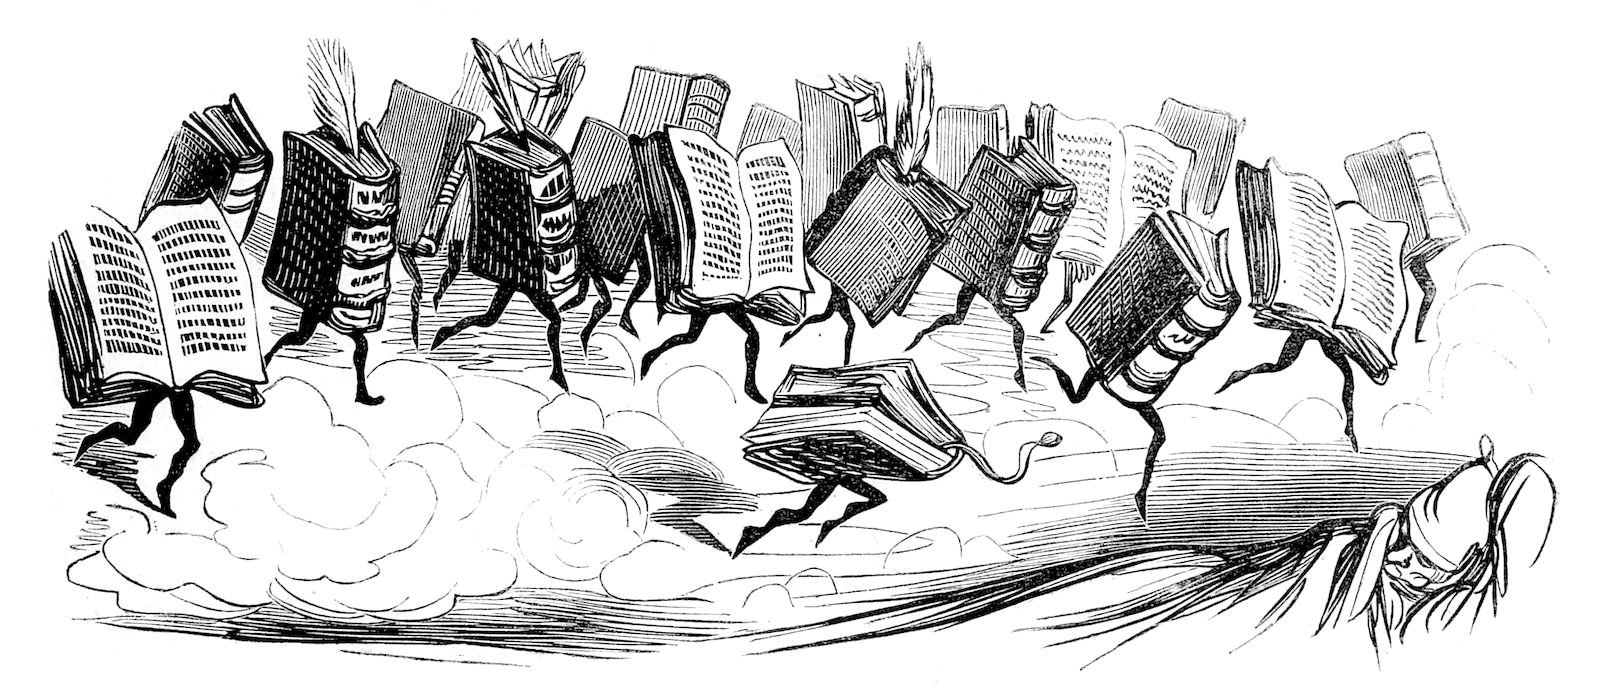 An engraving of books with legs running in a stampede